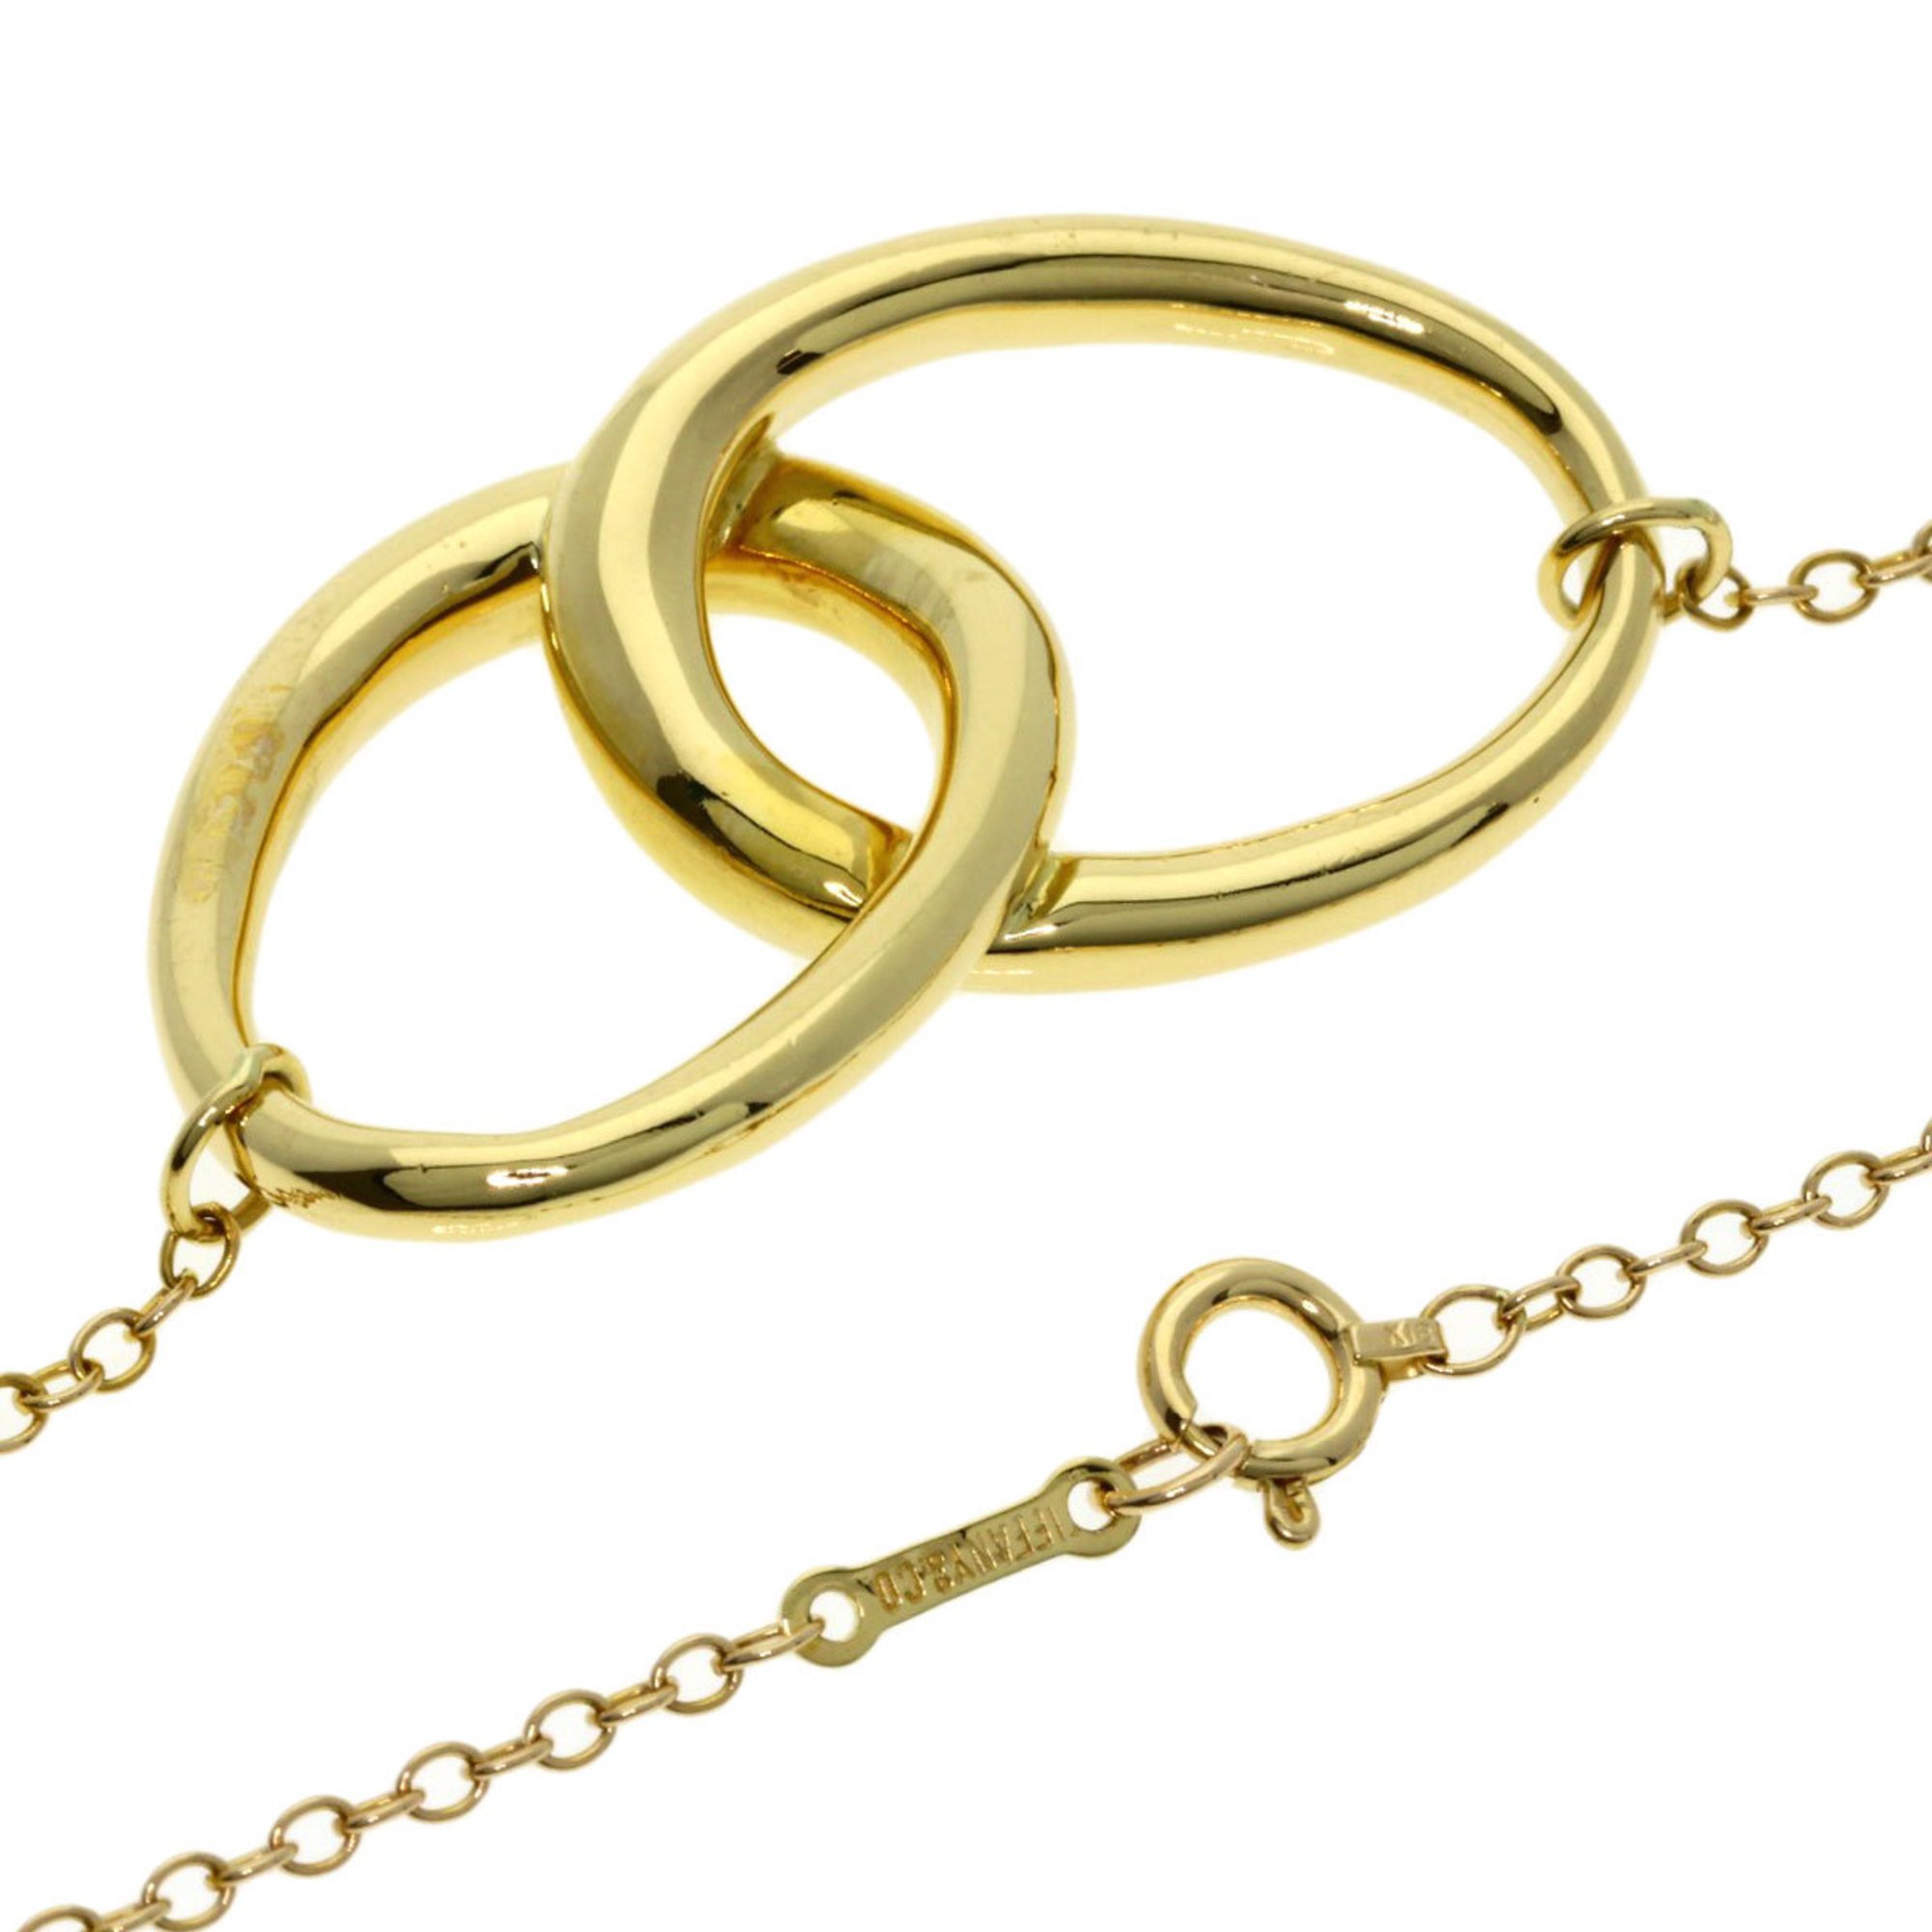 Tiffany Double Loop Necklace K18 Yellow Gold Women's